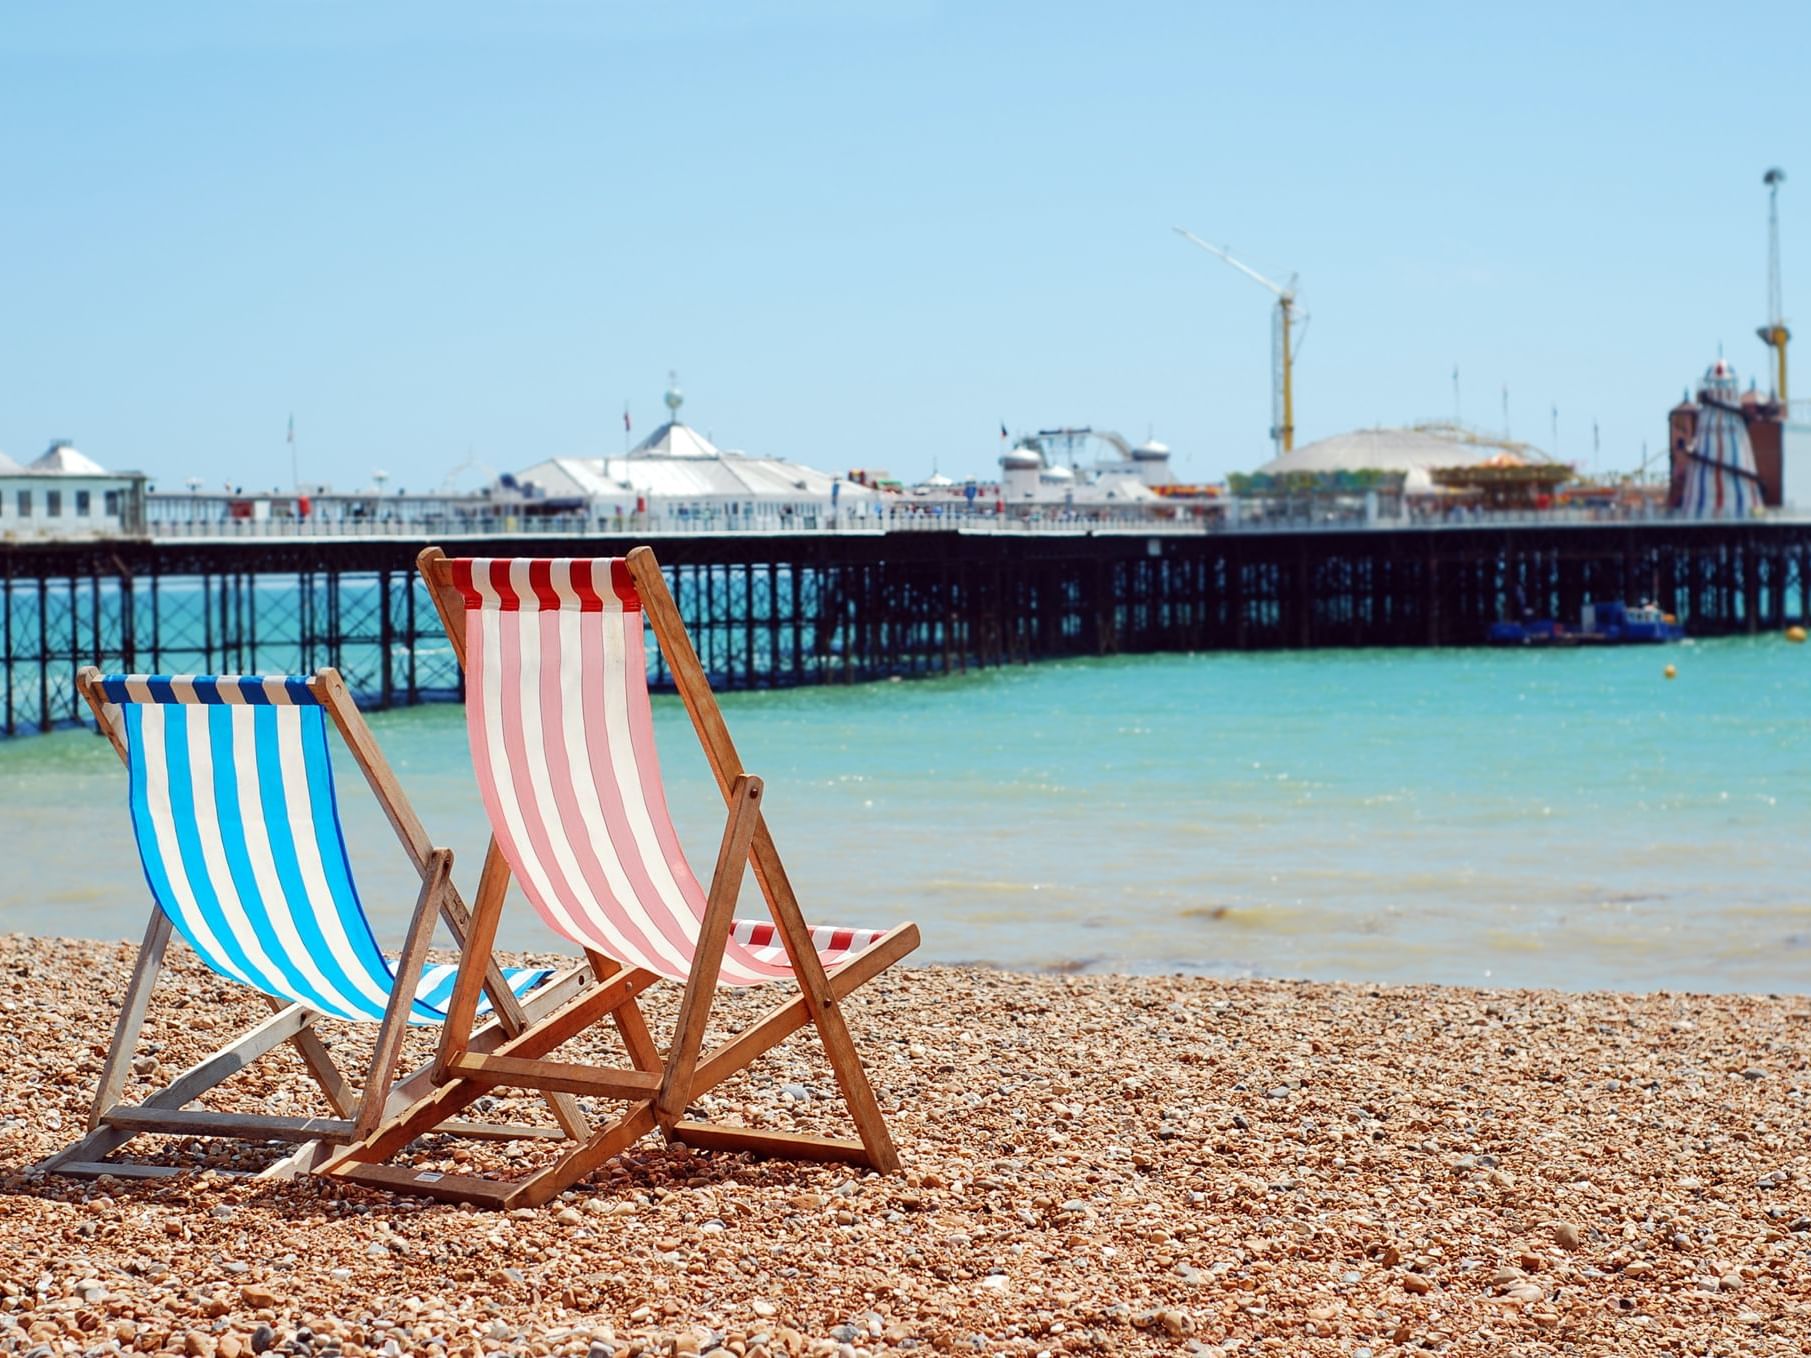 Two beach chairs at the coast of the beach facing the Brighton Palace Pier